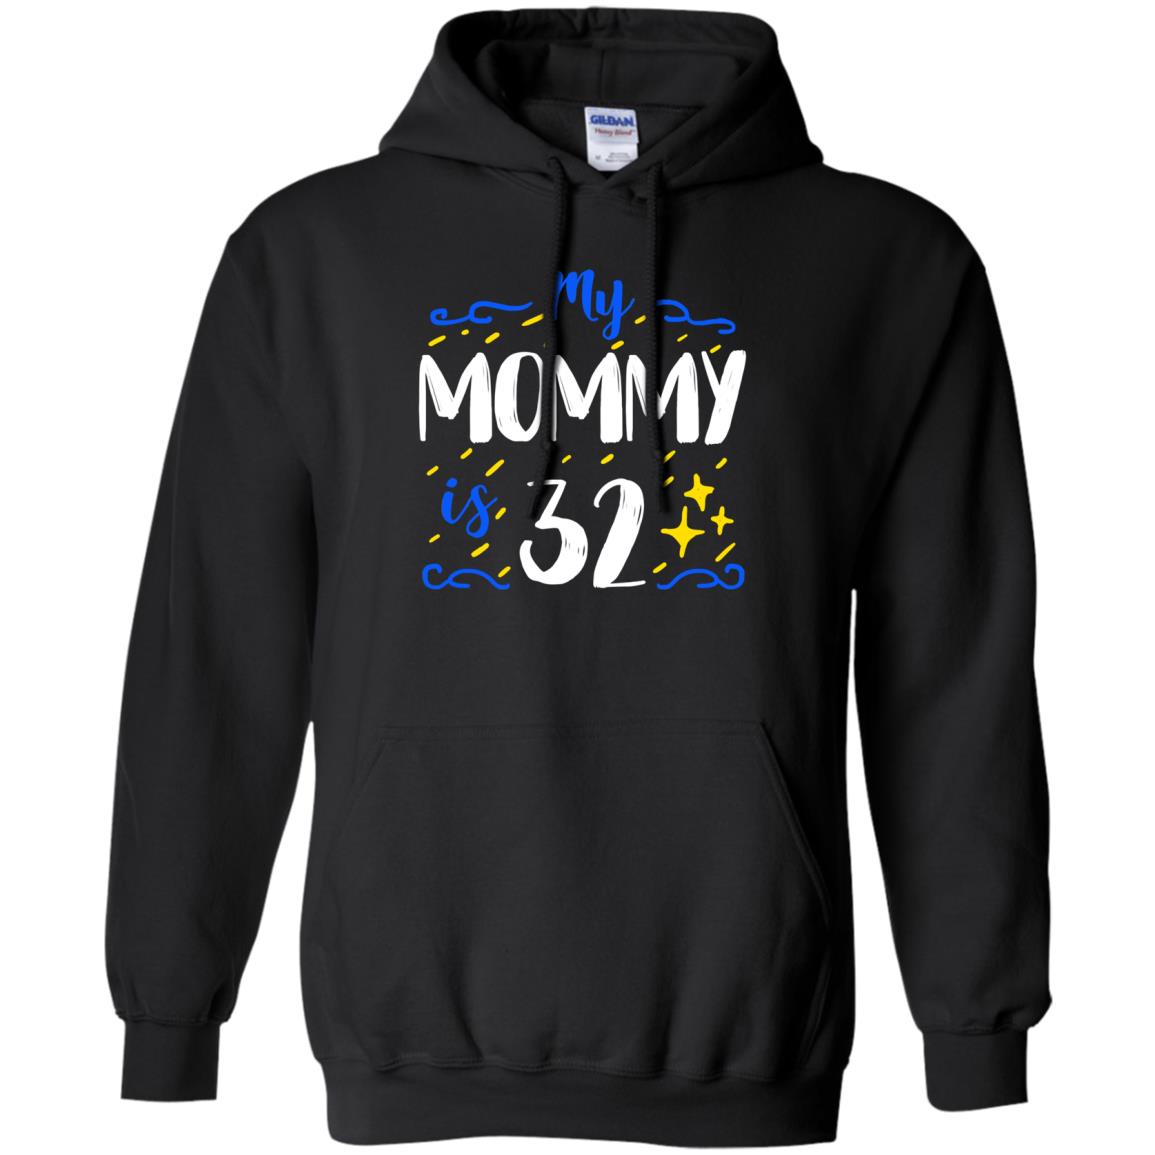 My Mommy Is 32 32th Birthday Mommy Shirt For Sons Or DaughtersG185 Gildan Pullover Hoodie 8 oz.